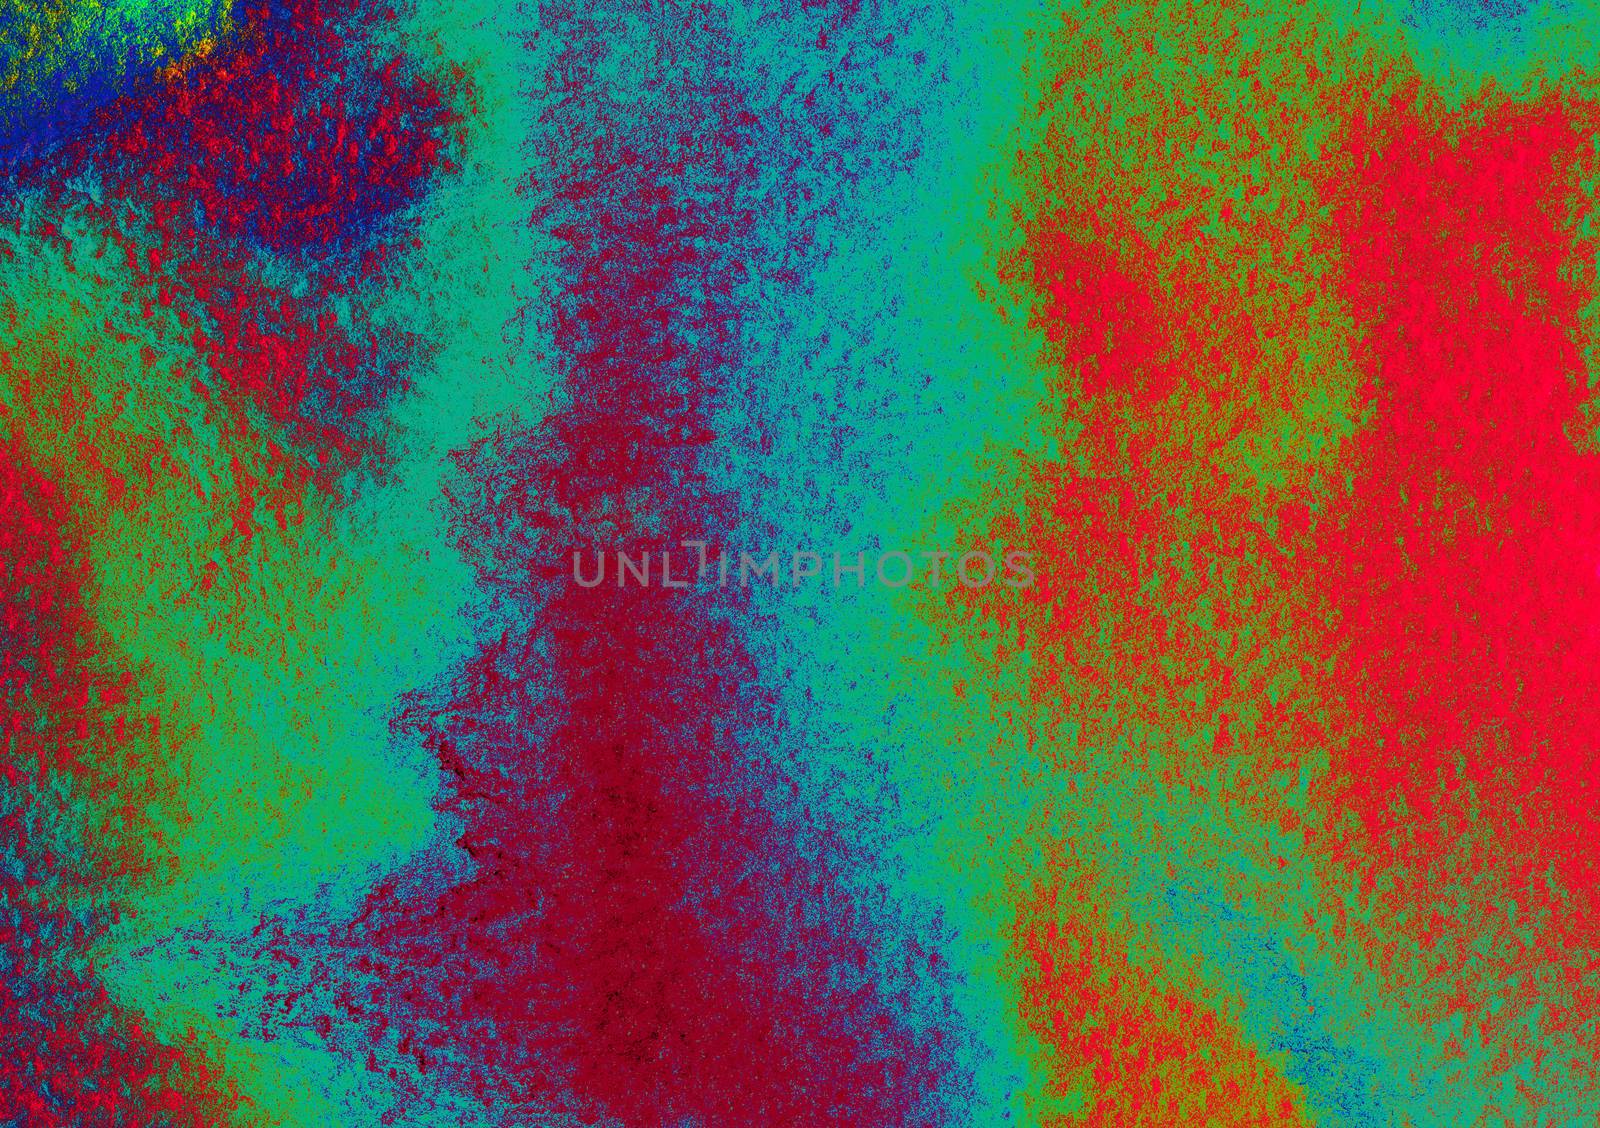 Blue green orange colors on textured paper background. Grunge vibrant painting effect pattern. Raster illustration with space for text, for media advertising website fashion concept design, banner